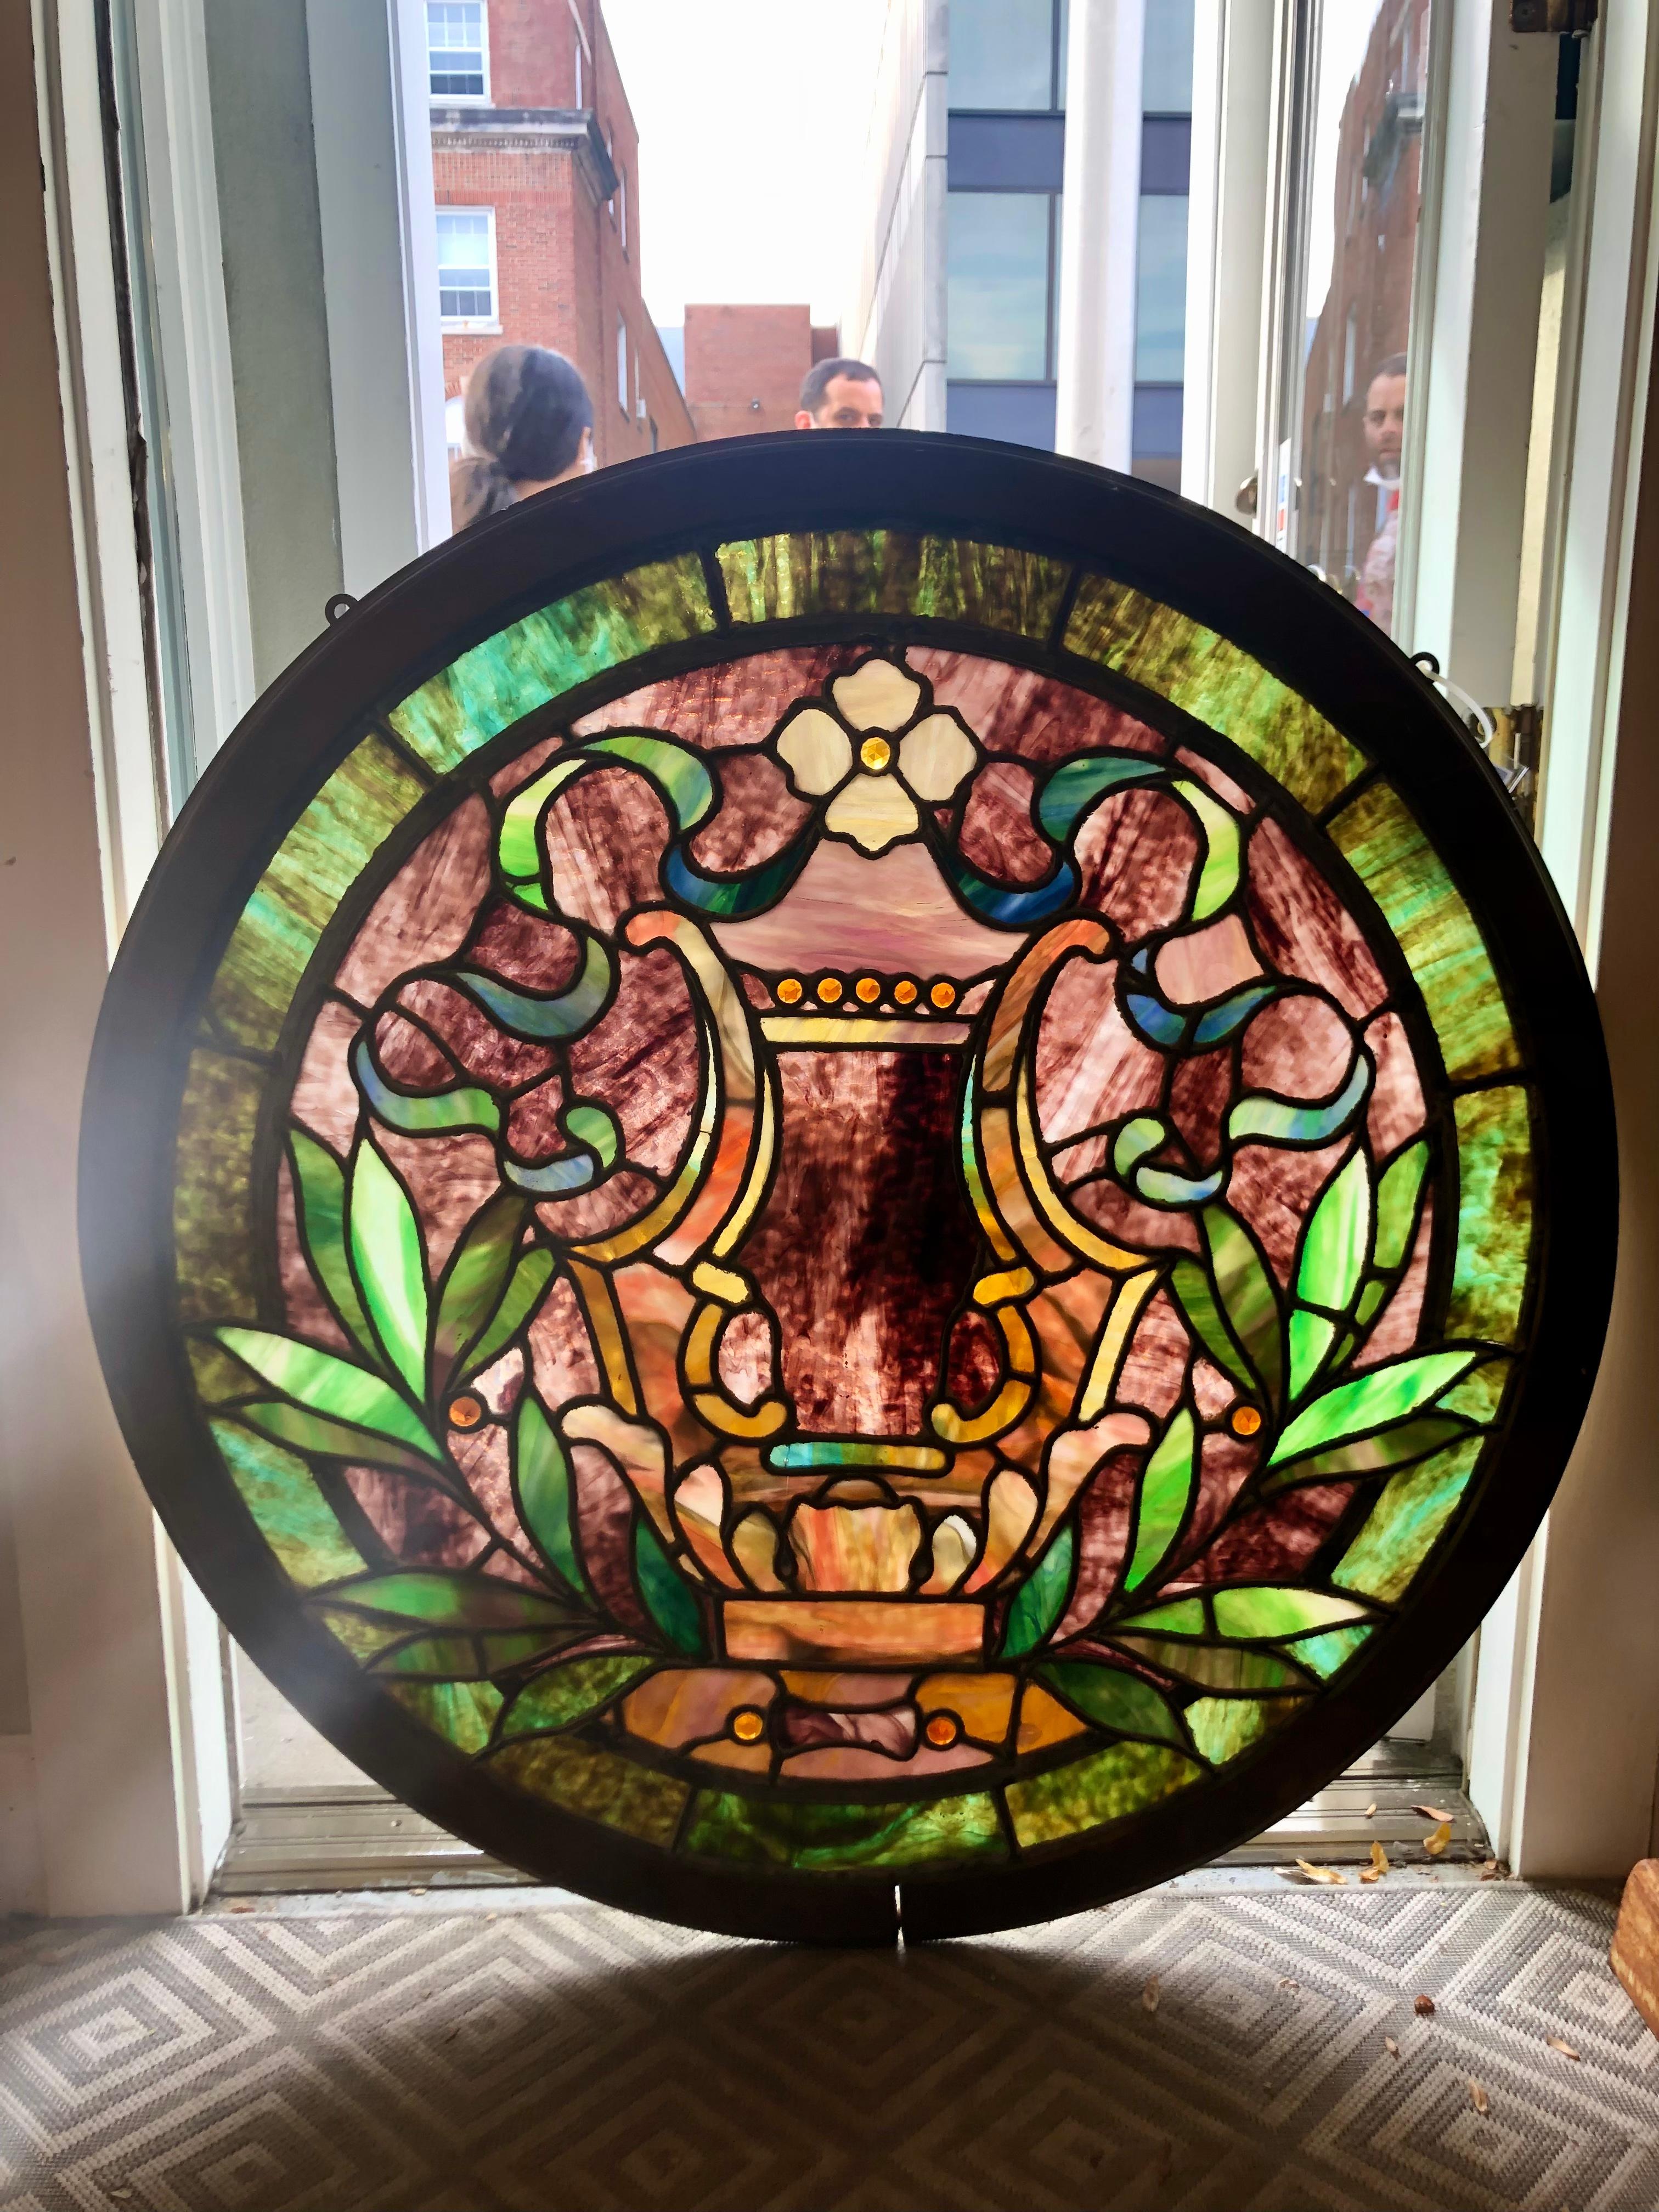 Late 19th century antique round stained glass window from upstate NY. This window has beautiful colors and is round which is hard to find. The stained glass window can hang in front of a window or in a interior wall its just a great window.